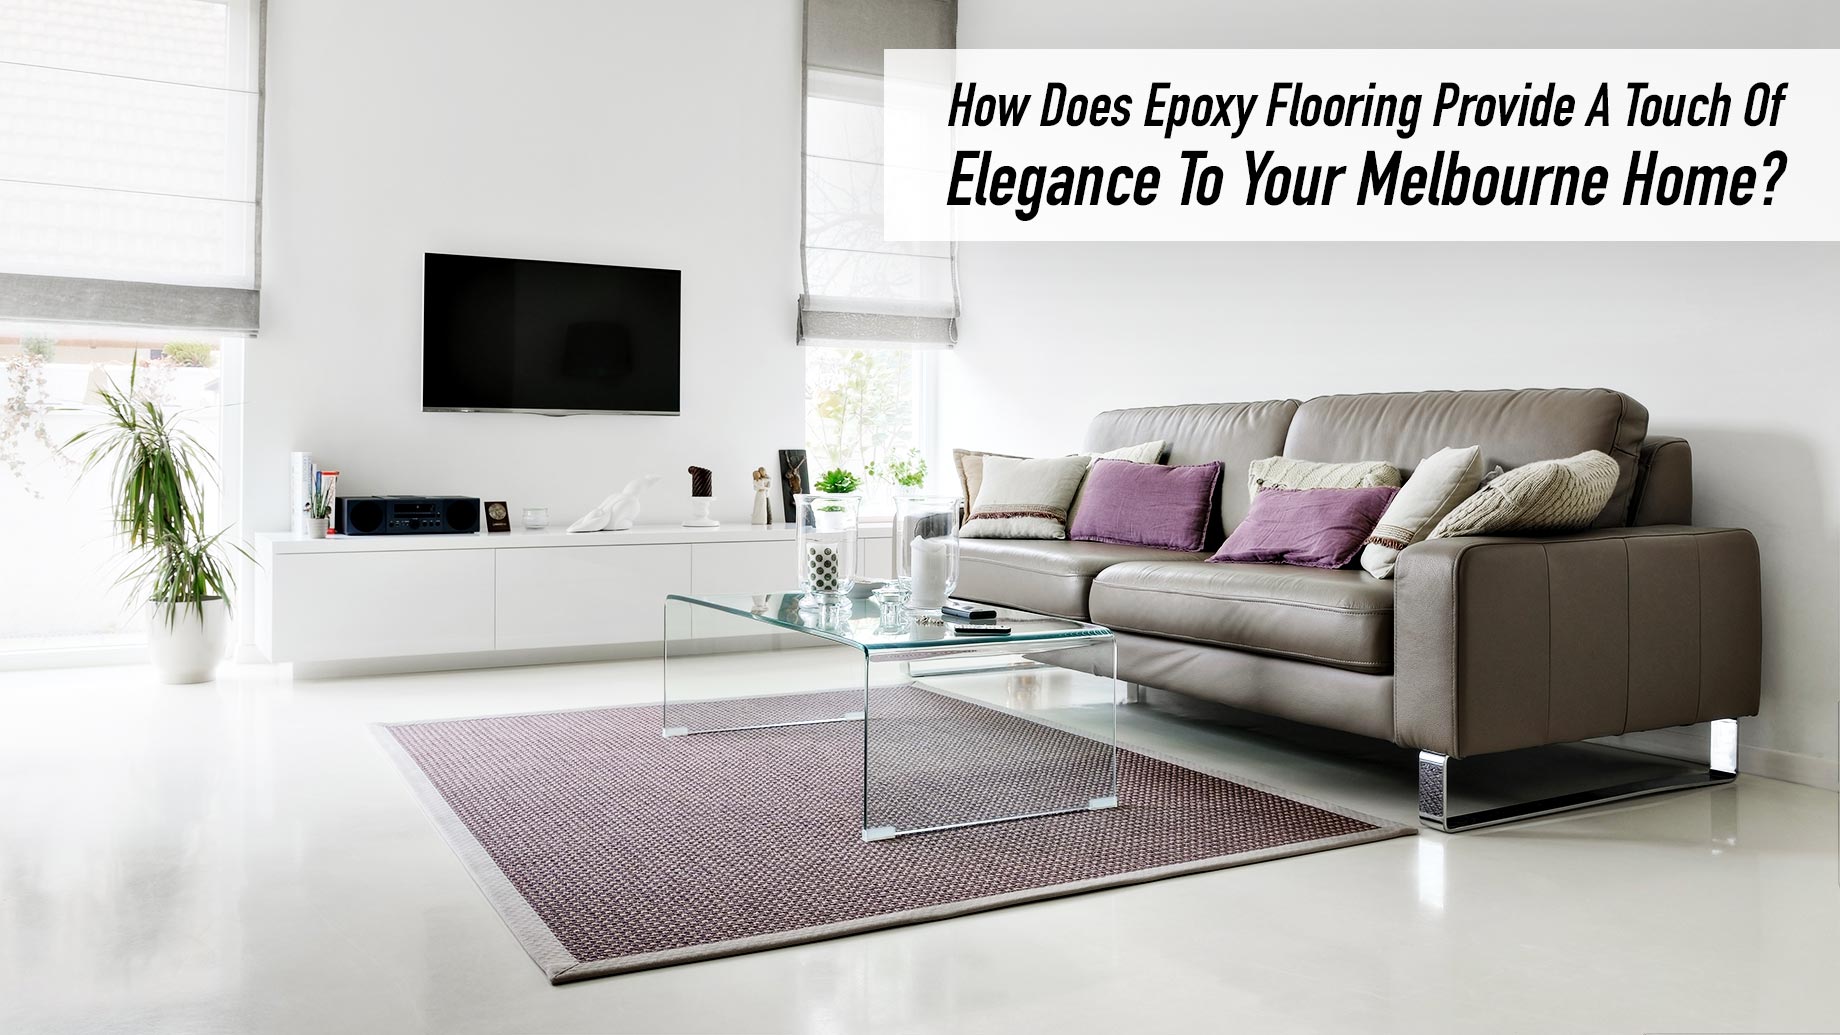 How Does Epoxy Flooring Provide A Touch Of Elegance To Your Melbourne Home?